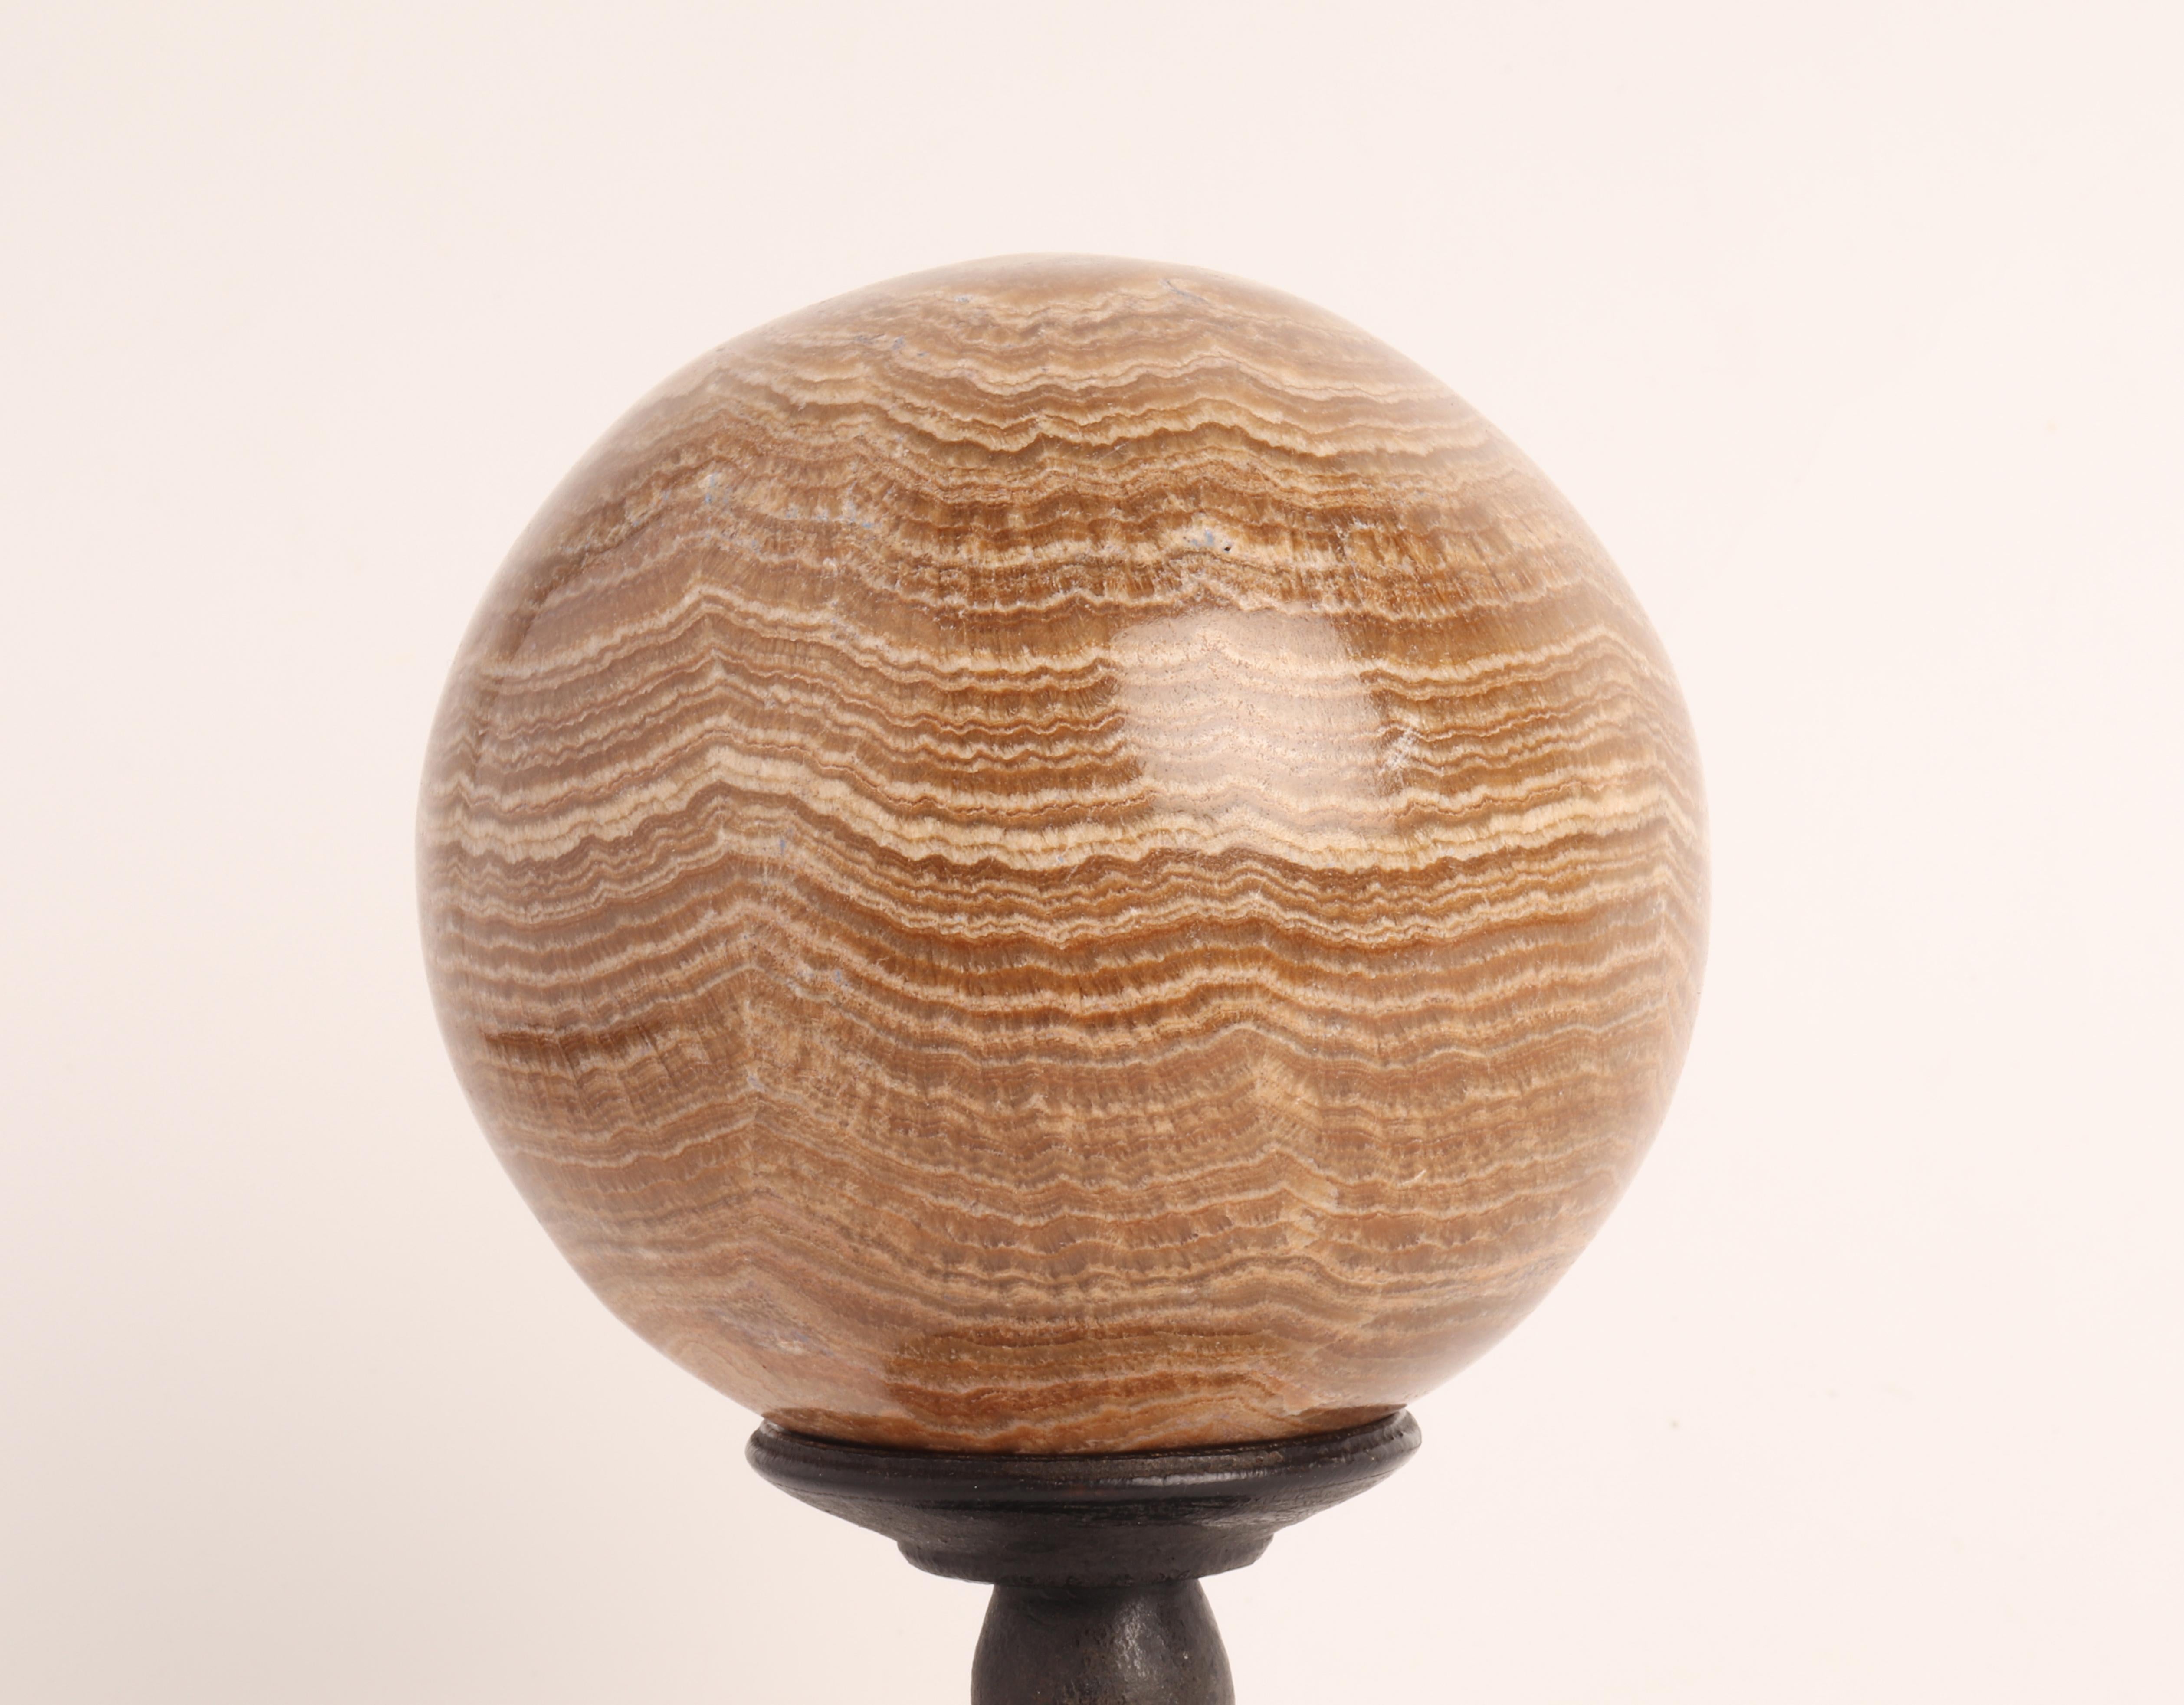 A sphere of Aragonite stone, resting on a base, made out of ebonized wood that has a column with a wavy profile that opens upwards with a concave top. Italy circa 1870.